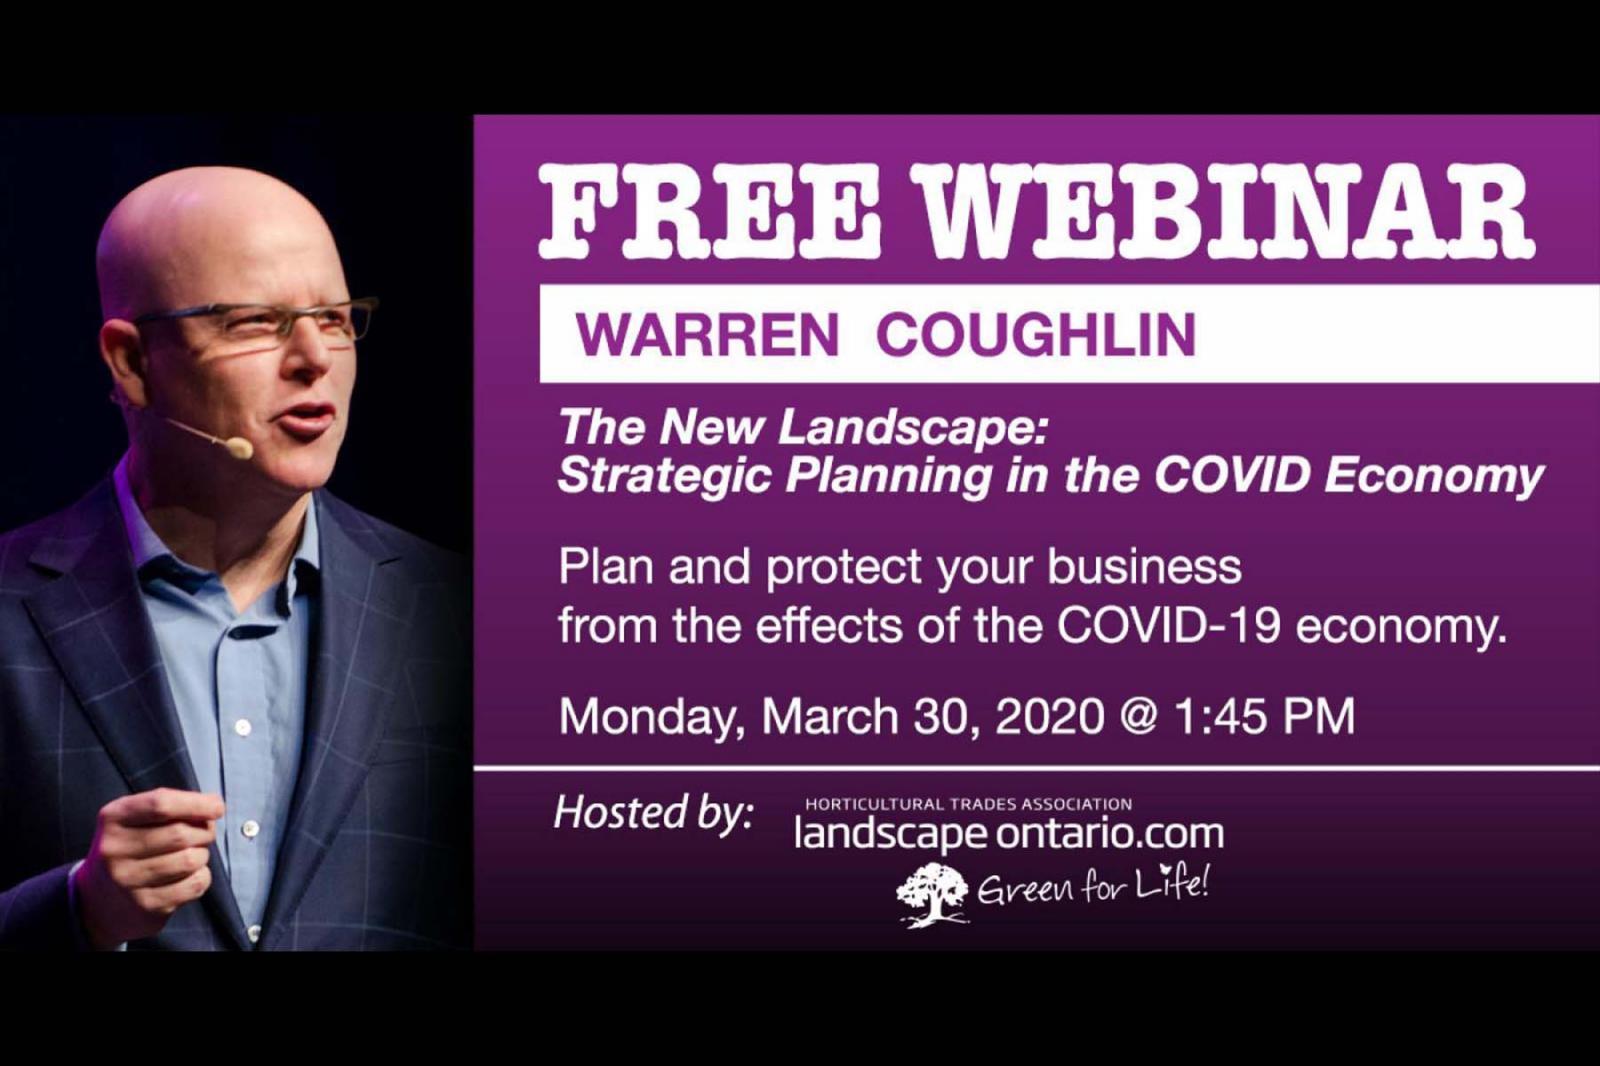 Strategic Planning in the COVID Economy with Warren Coughlin